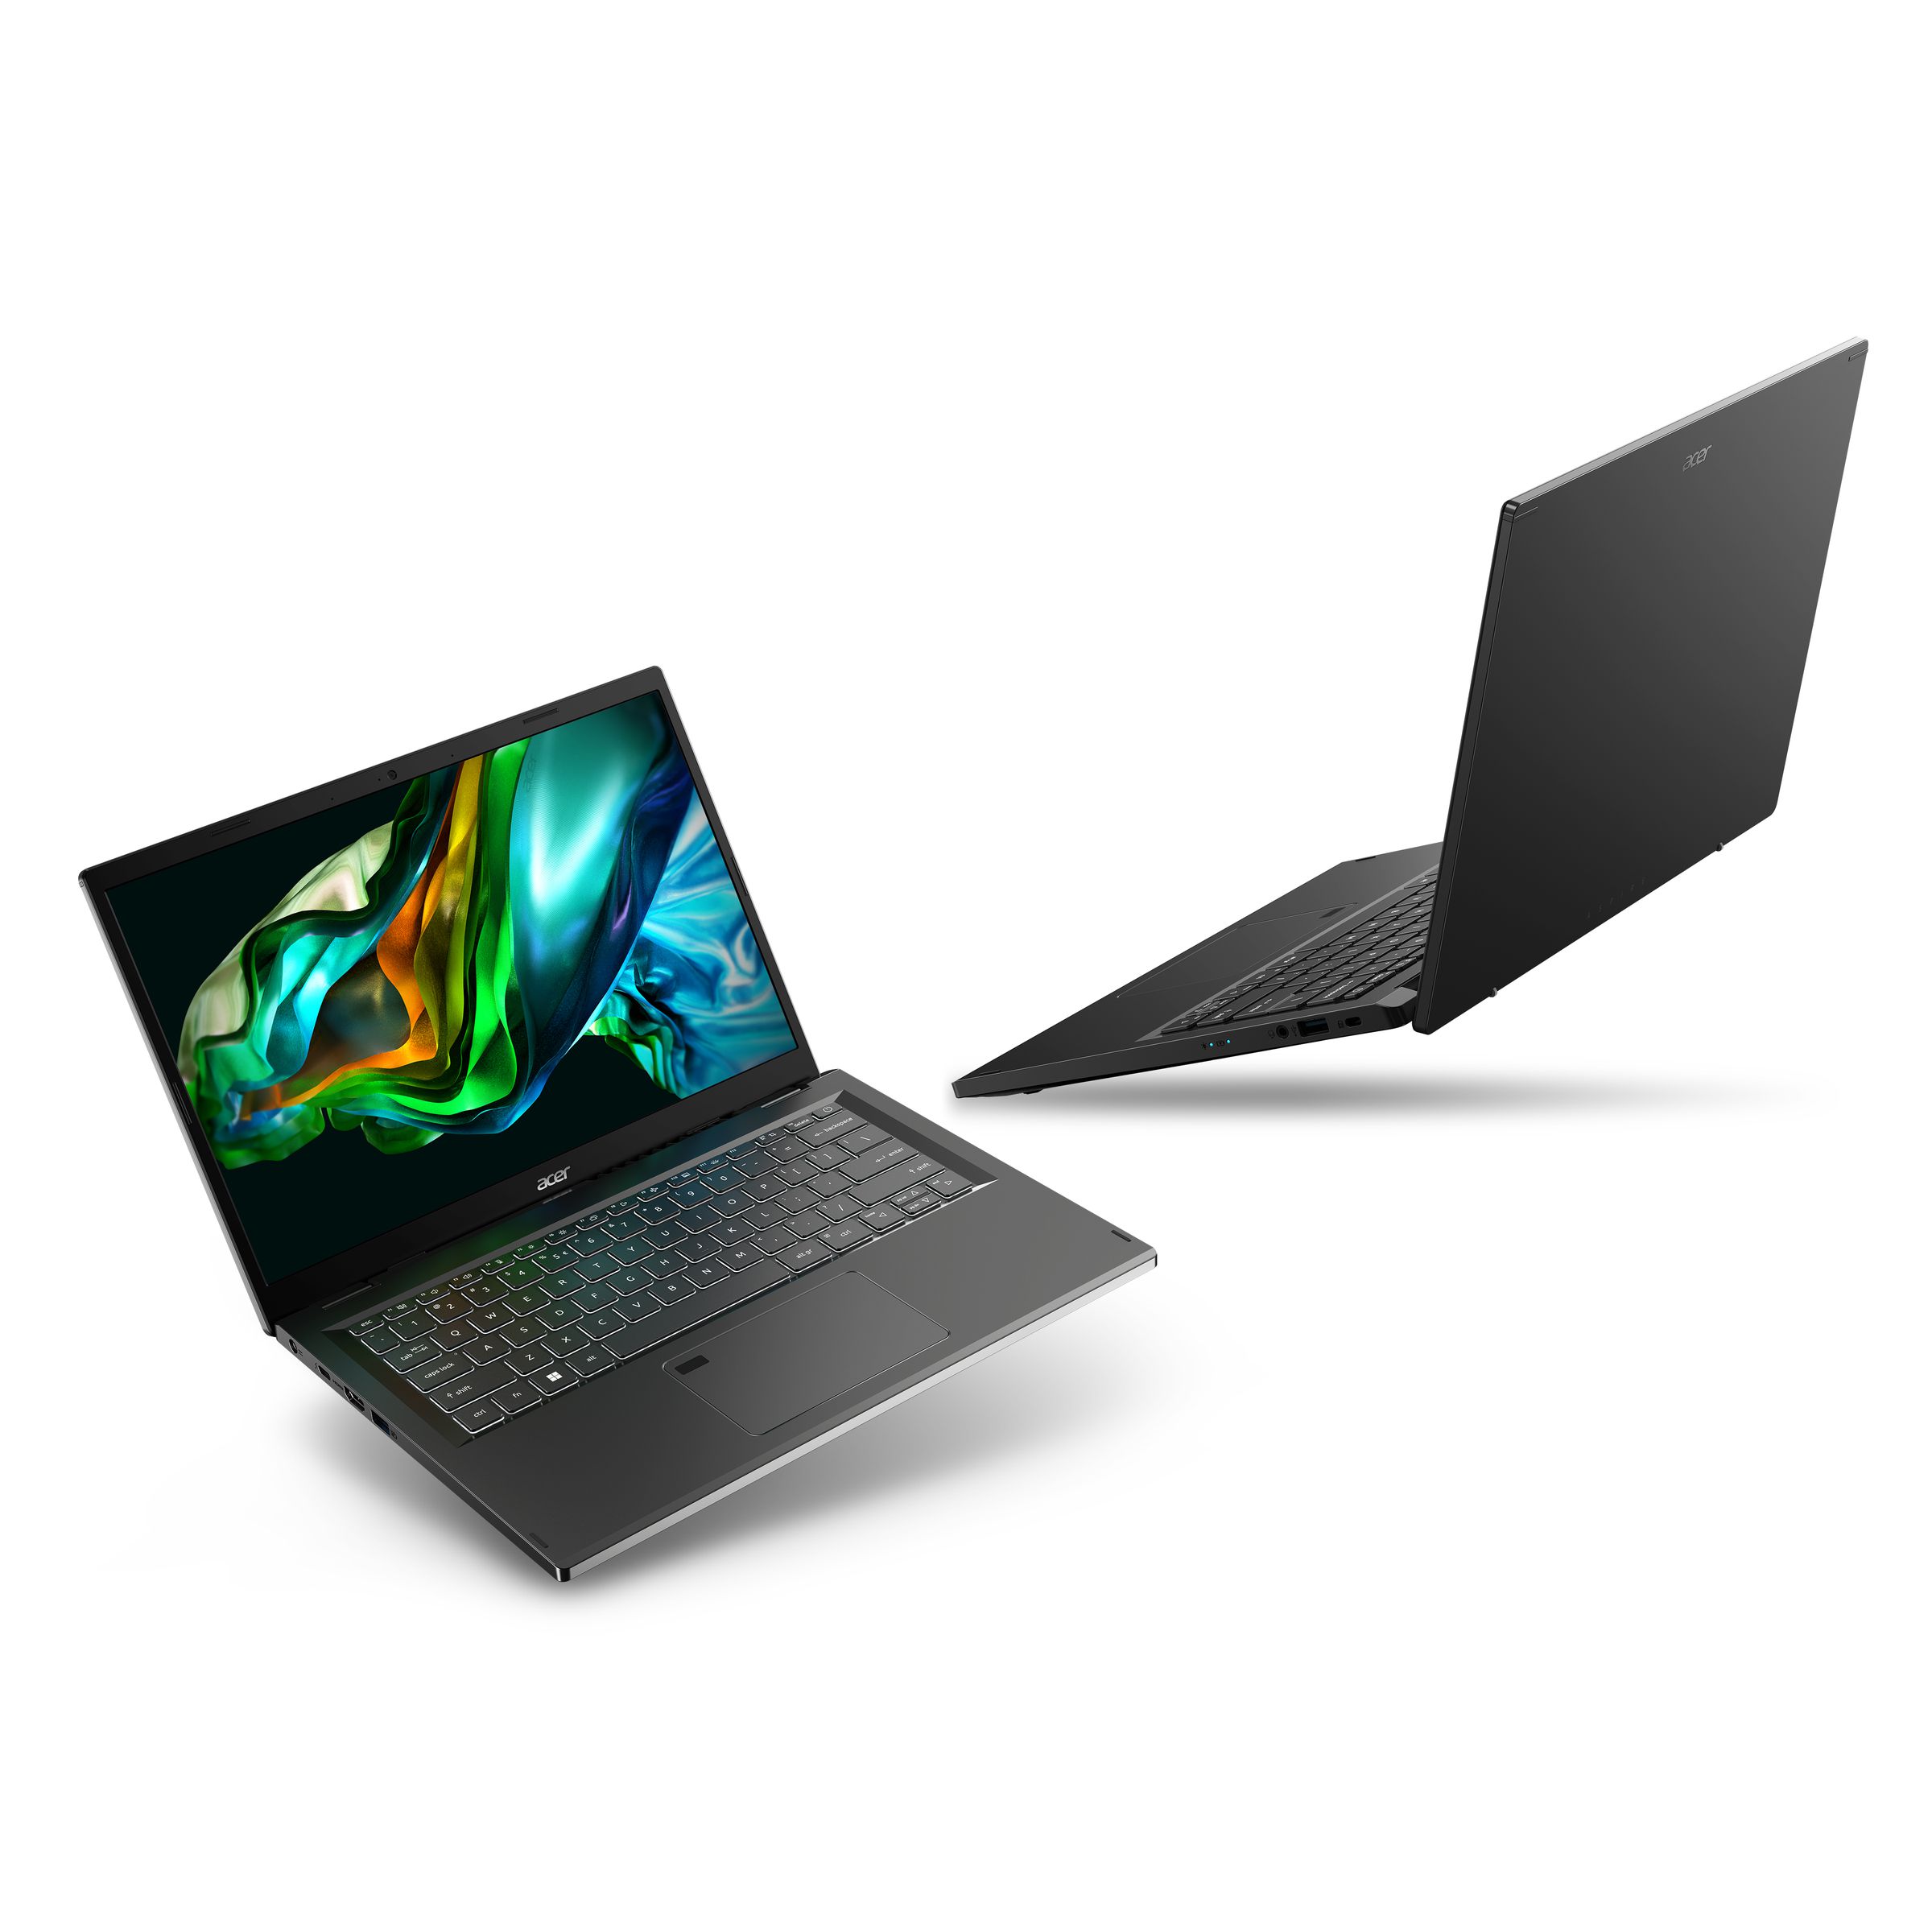 An image showing an Aspire 5 laptop from the front and back